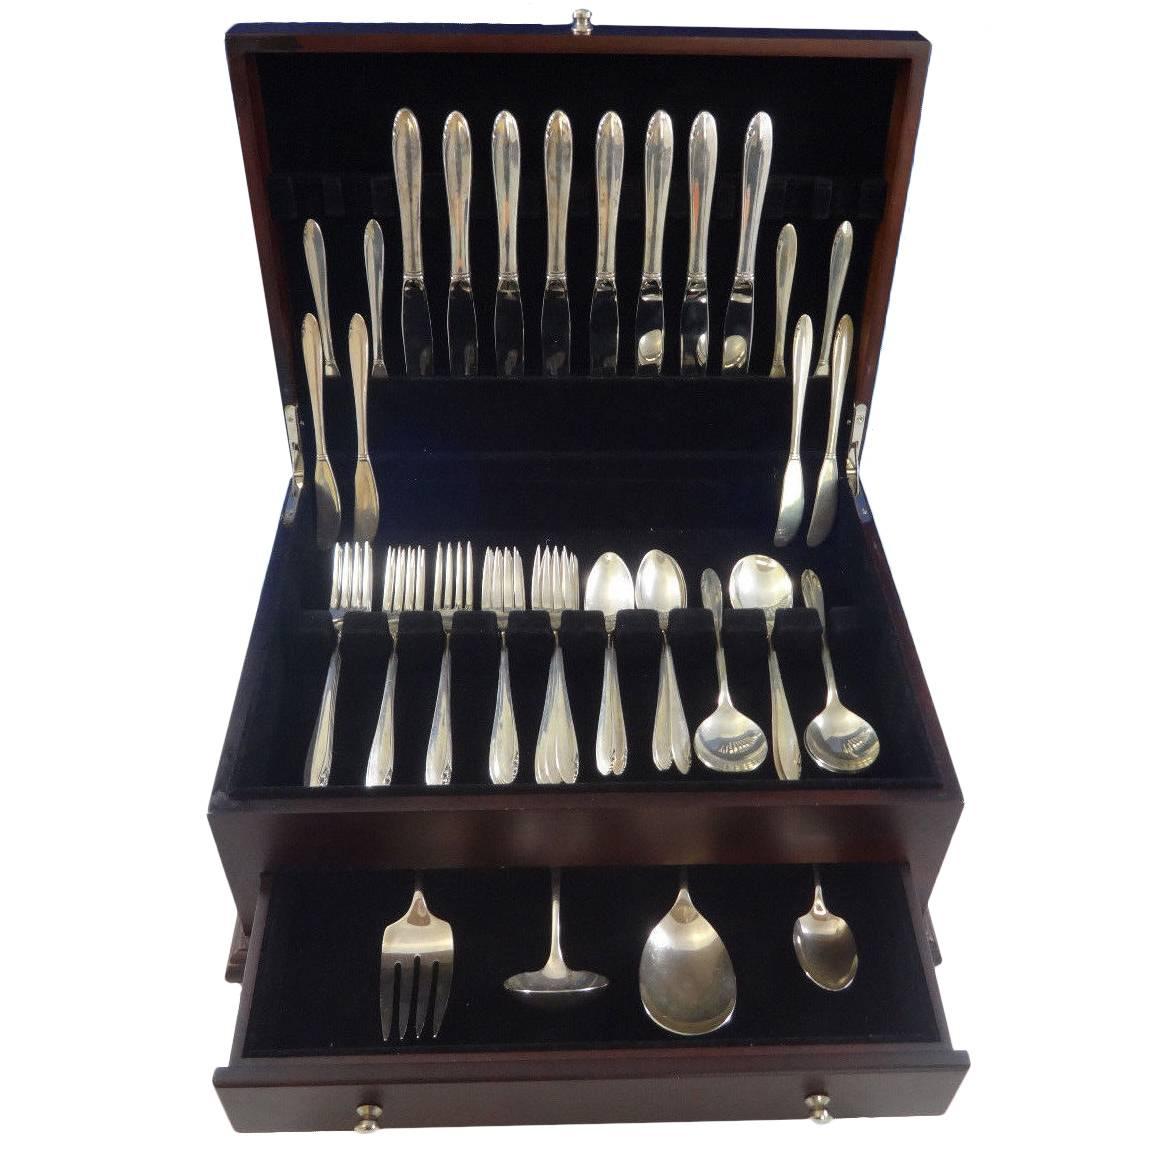 Lasting Spring by Oneida sterling silver flatware set of 52 pieces. This pattern has a simple, Mid-Century Modern design. This set includes:

Eight knives, 8 7/8